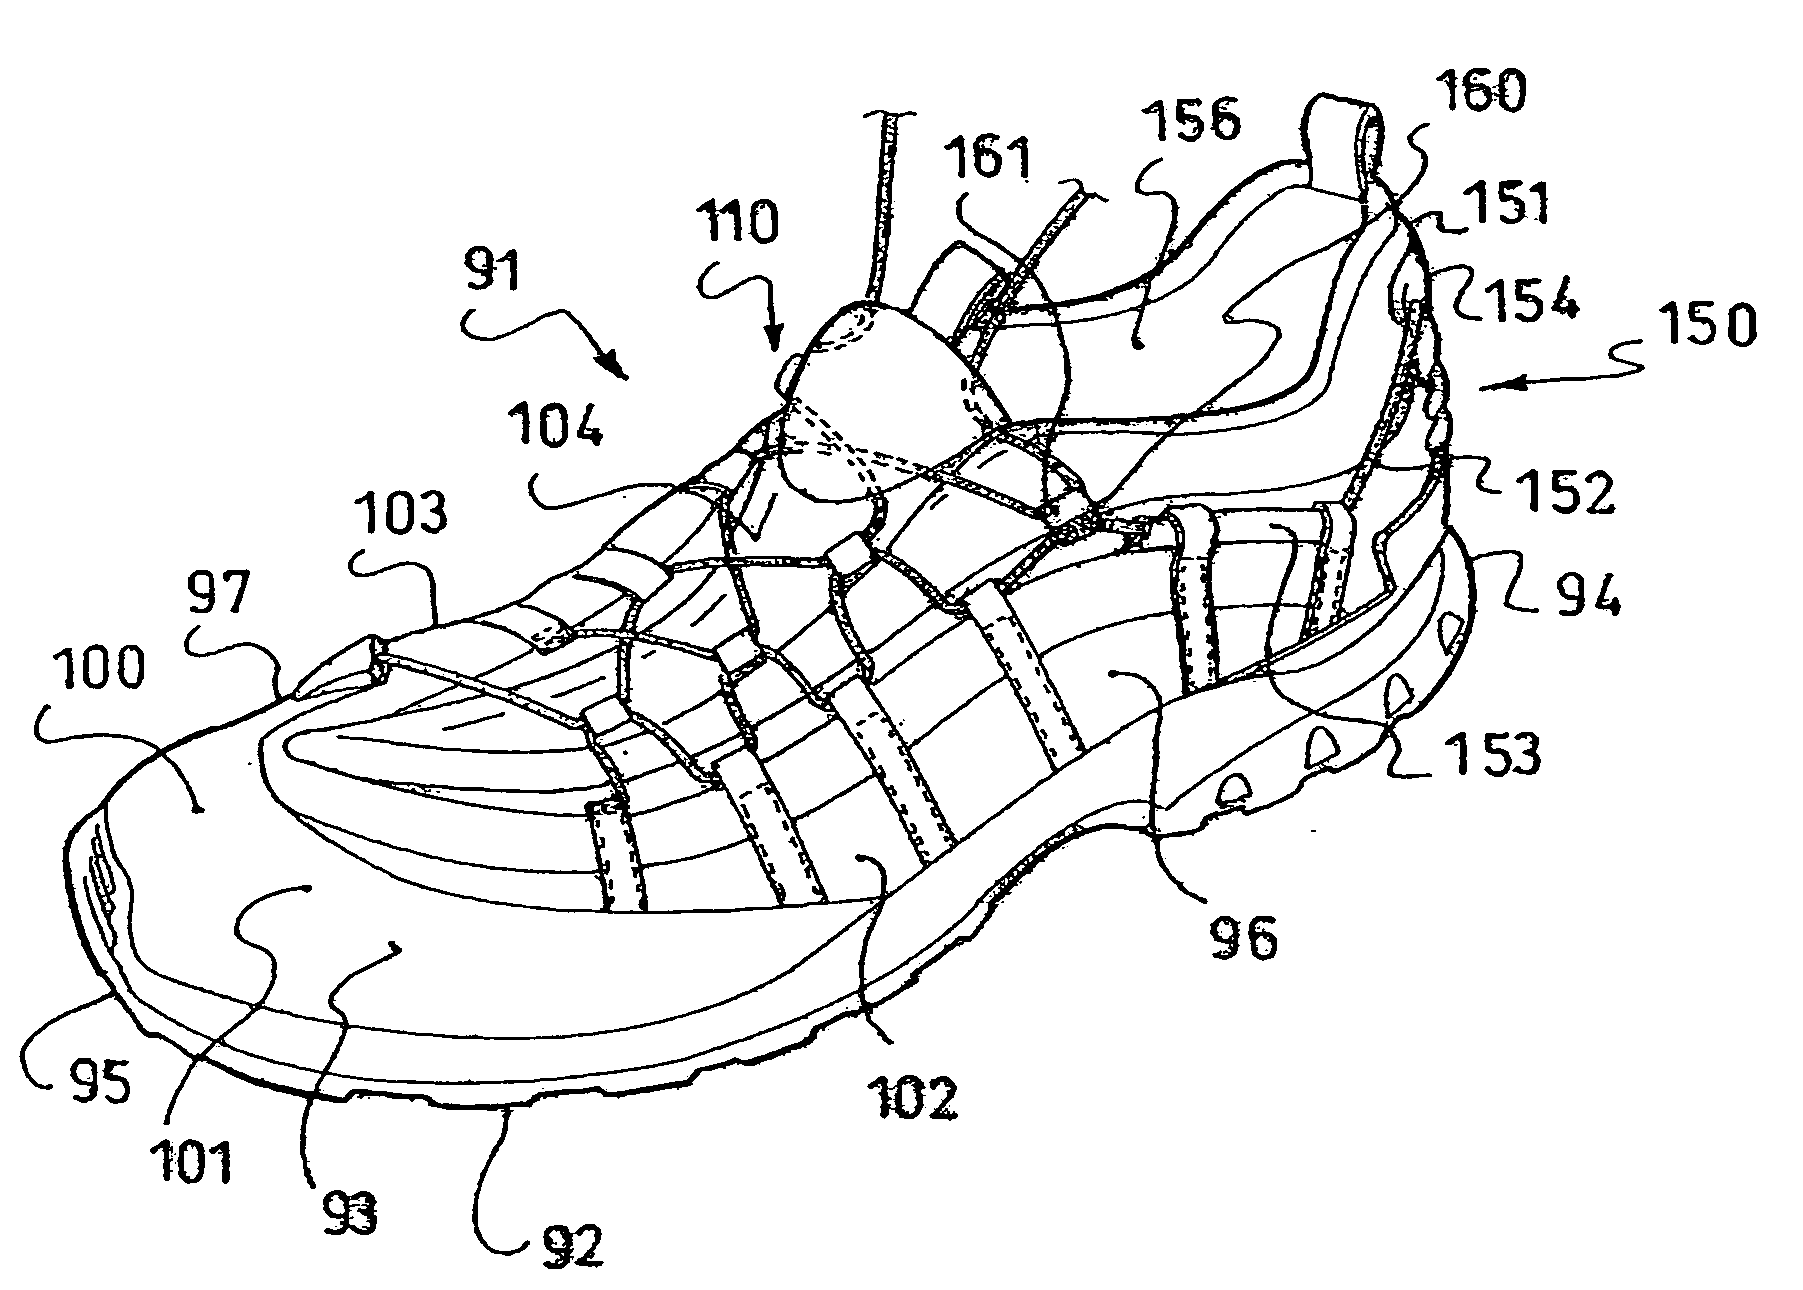 Footwear with improved tightening of the upper